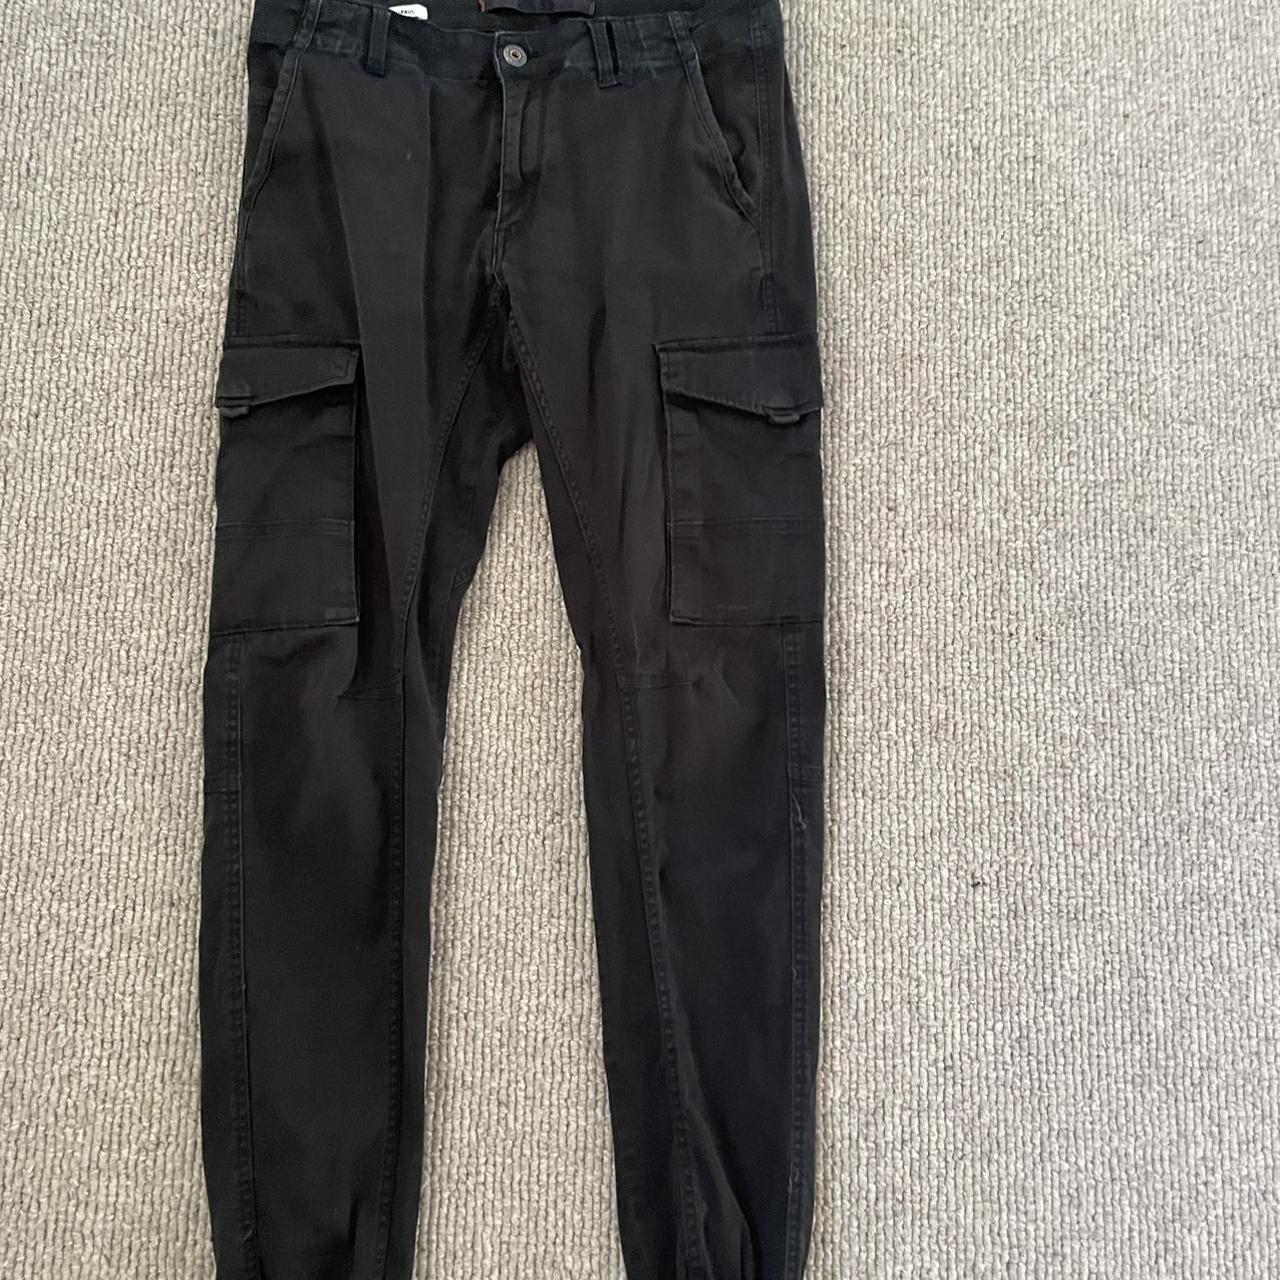 Plain Black Cargos Only used a couple times. Great... - Depop